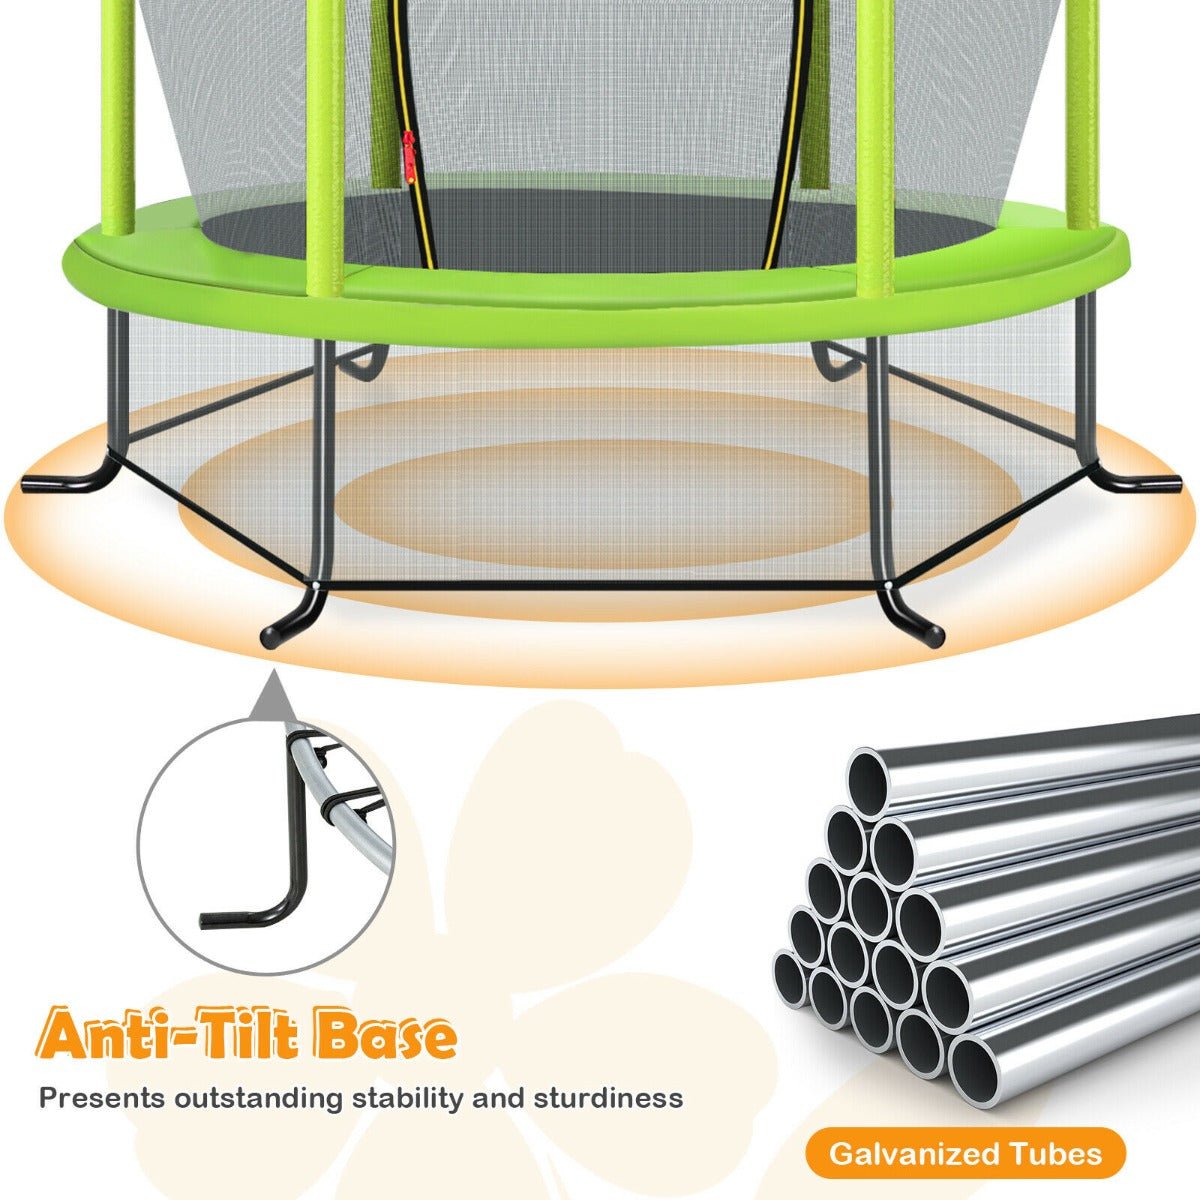 Boundless Joy: Green Mini Trampoline with Enclosure Net for Kids